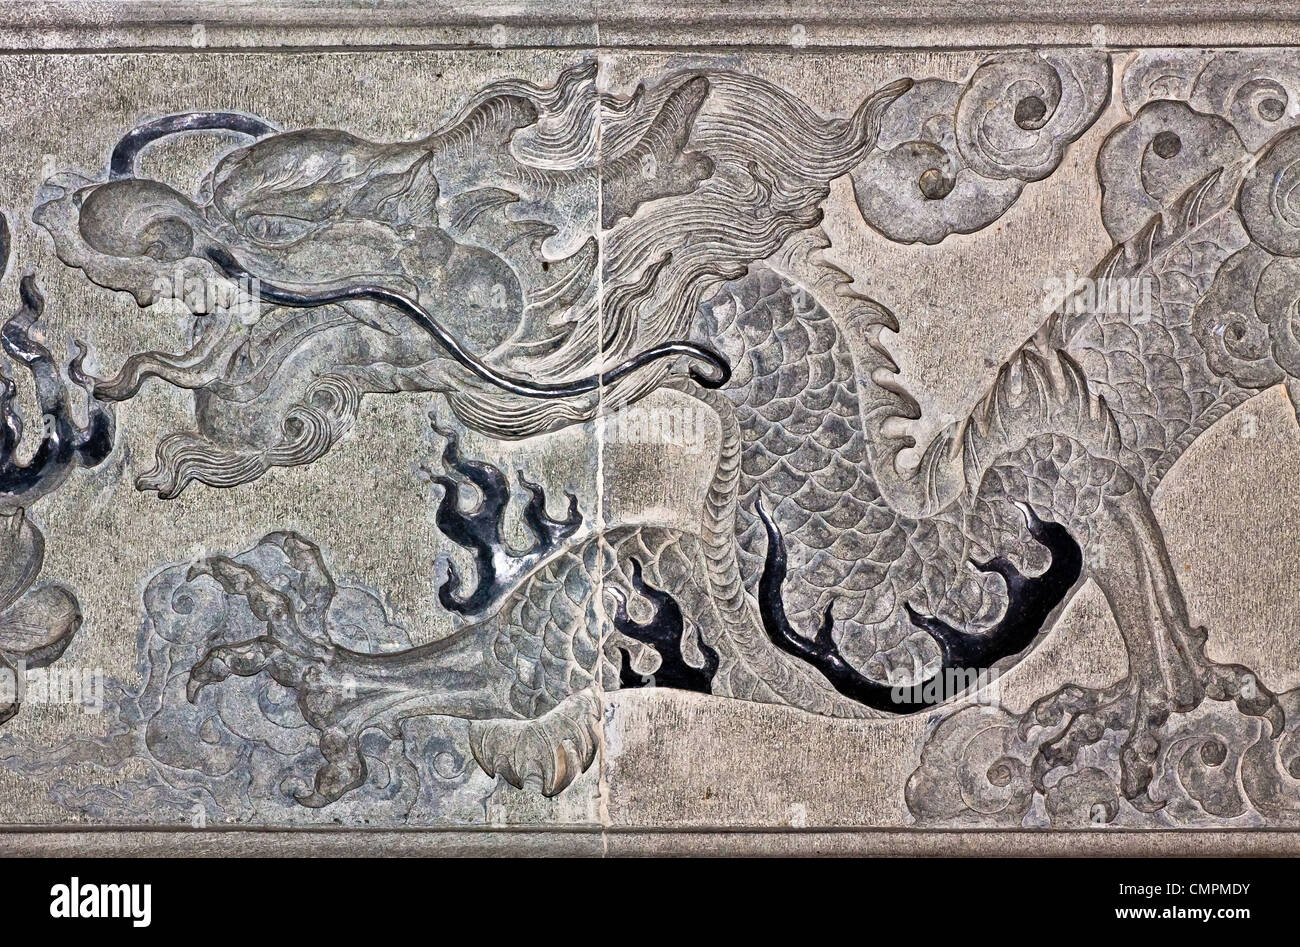 Dragon carve on wall expressing power and status in ancient China. Stock Photo